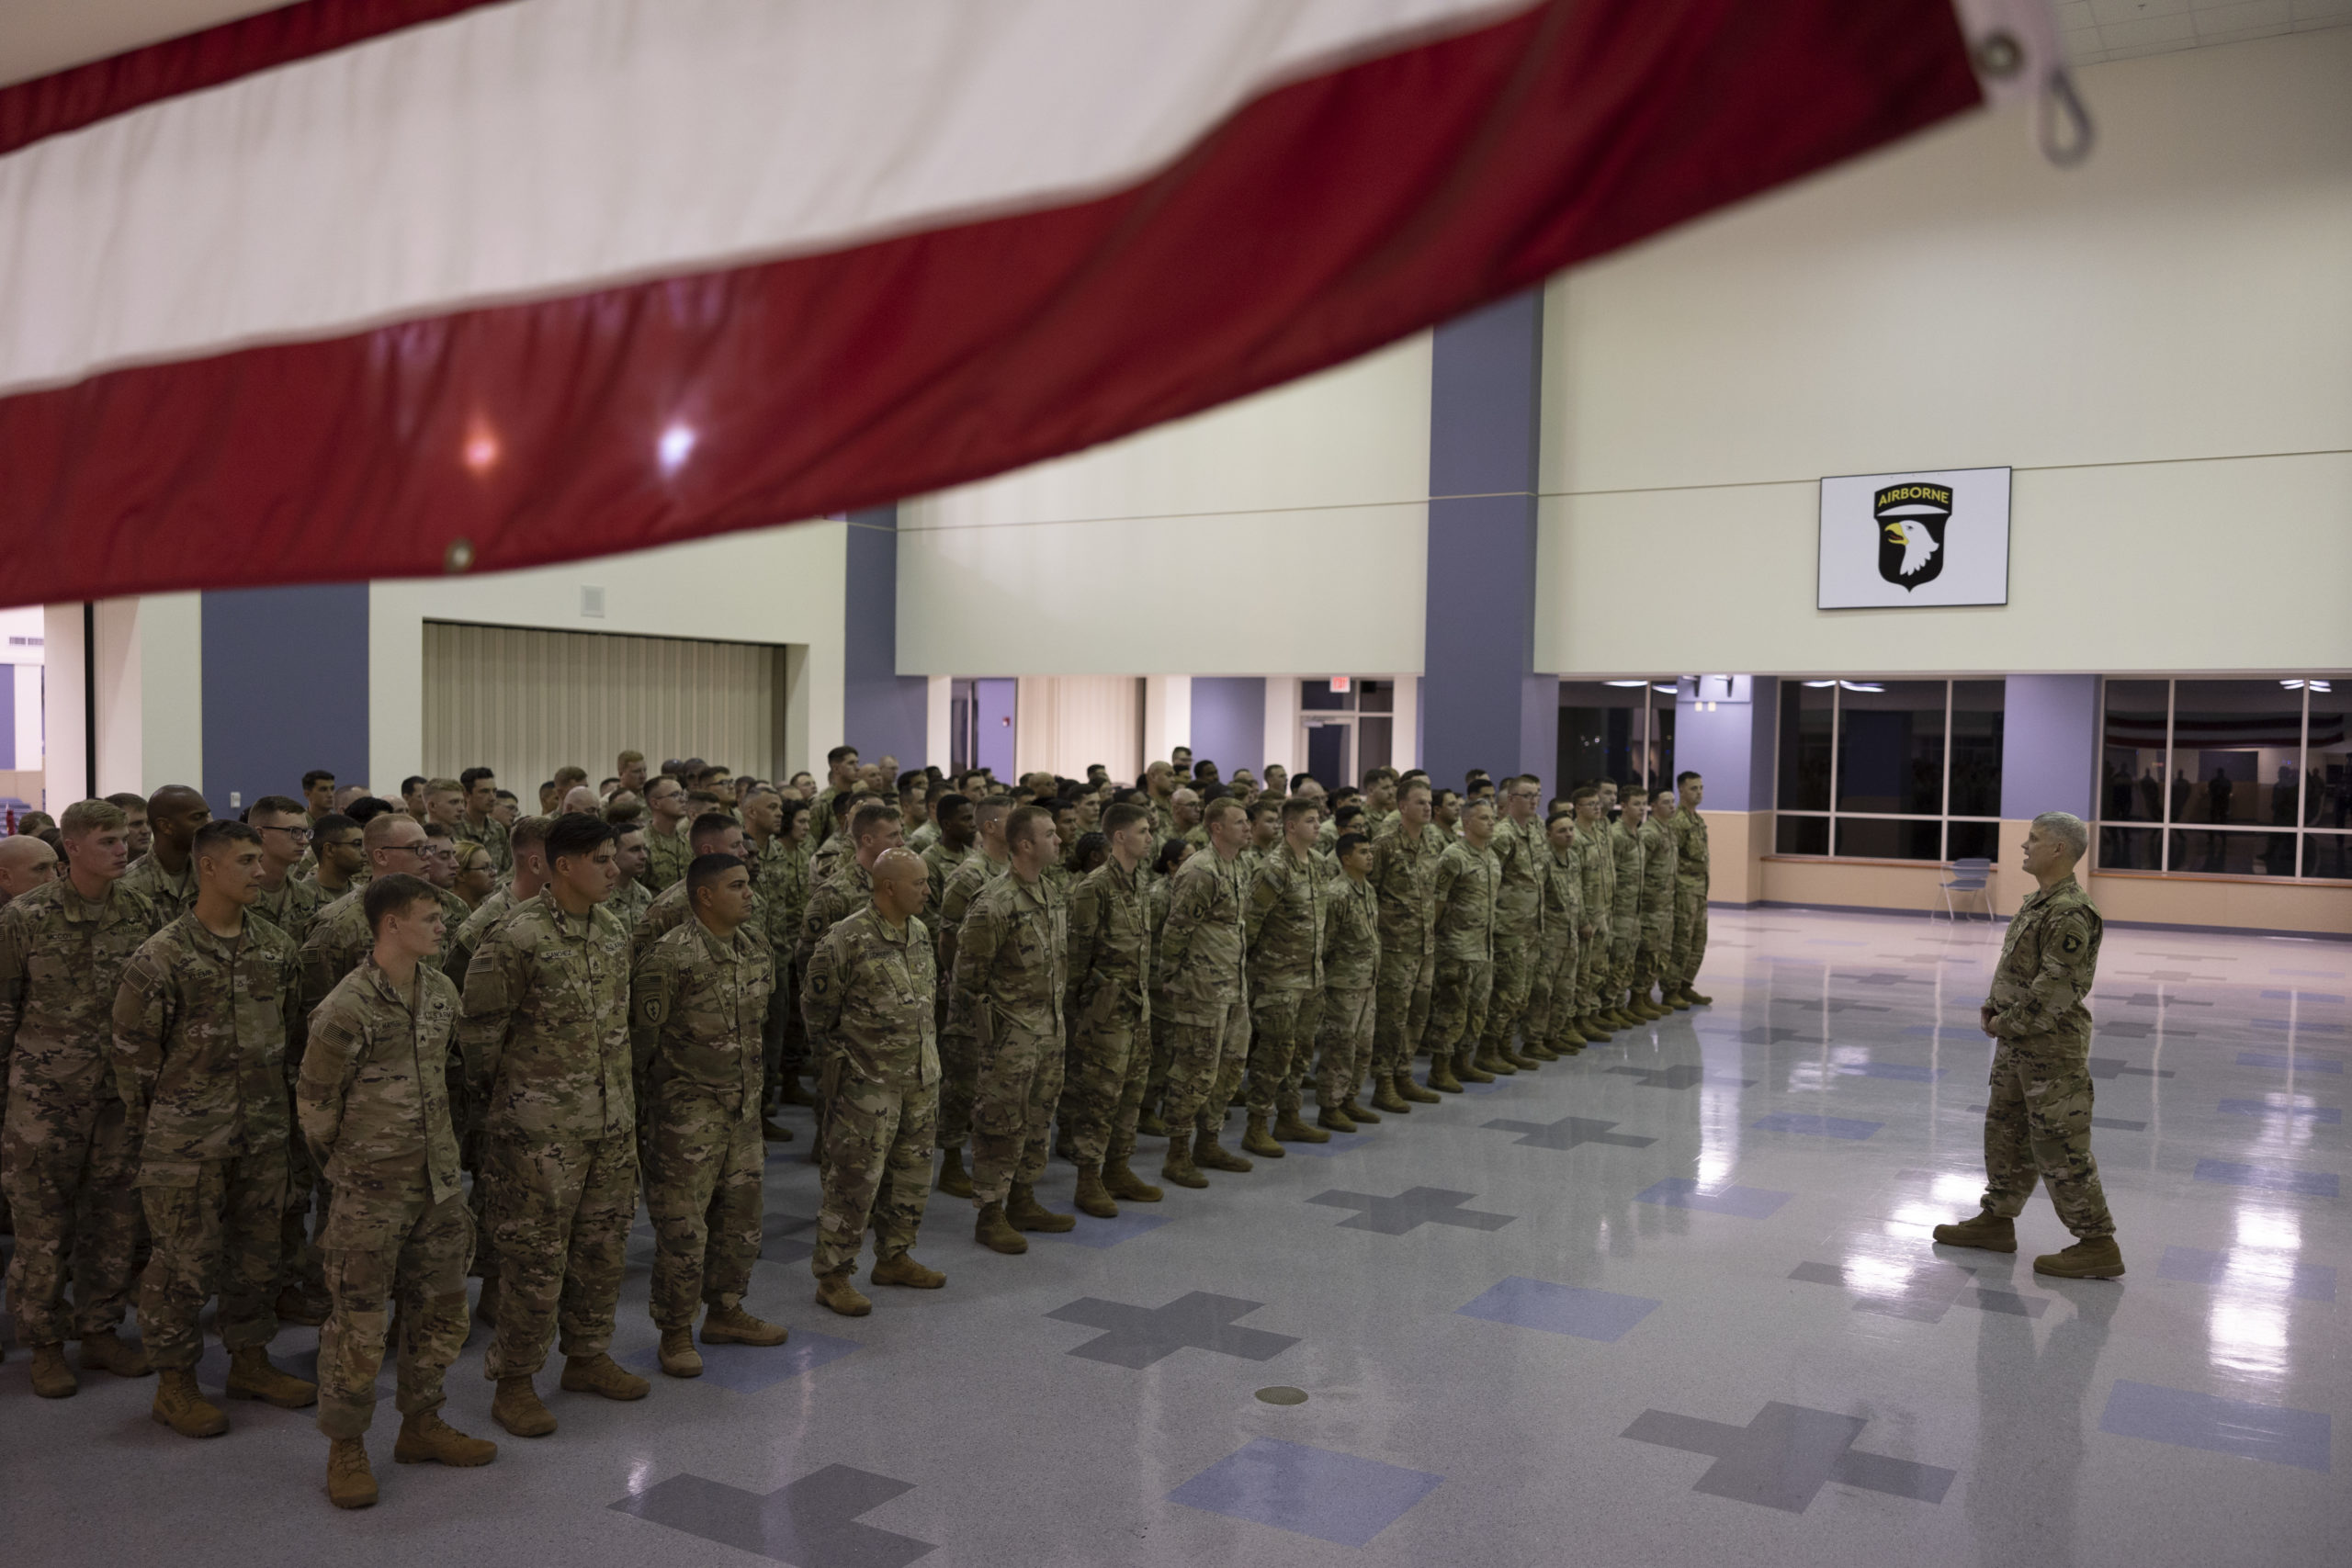 FORT CAMPBELL, KY - JULY 06: U.S. Army Col. Scott D. Wilkinson delivers a message to members of the 2nd Brigade Combat Team of the 101st Airborne Division prior to their departure for Europe on July 6, 2022 in Fort Campbell, Kentucky. 